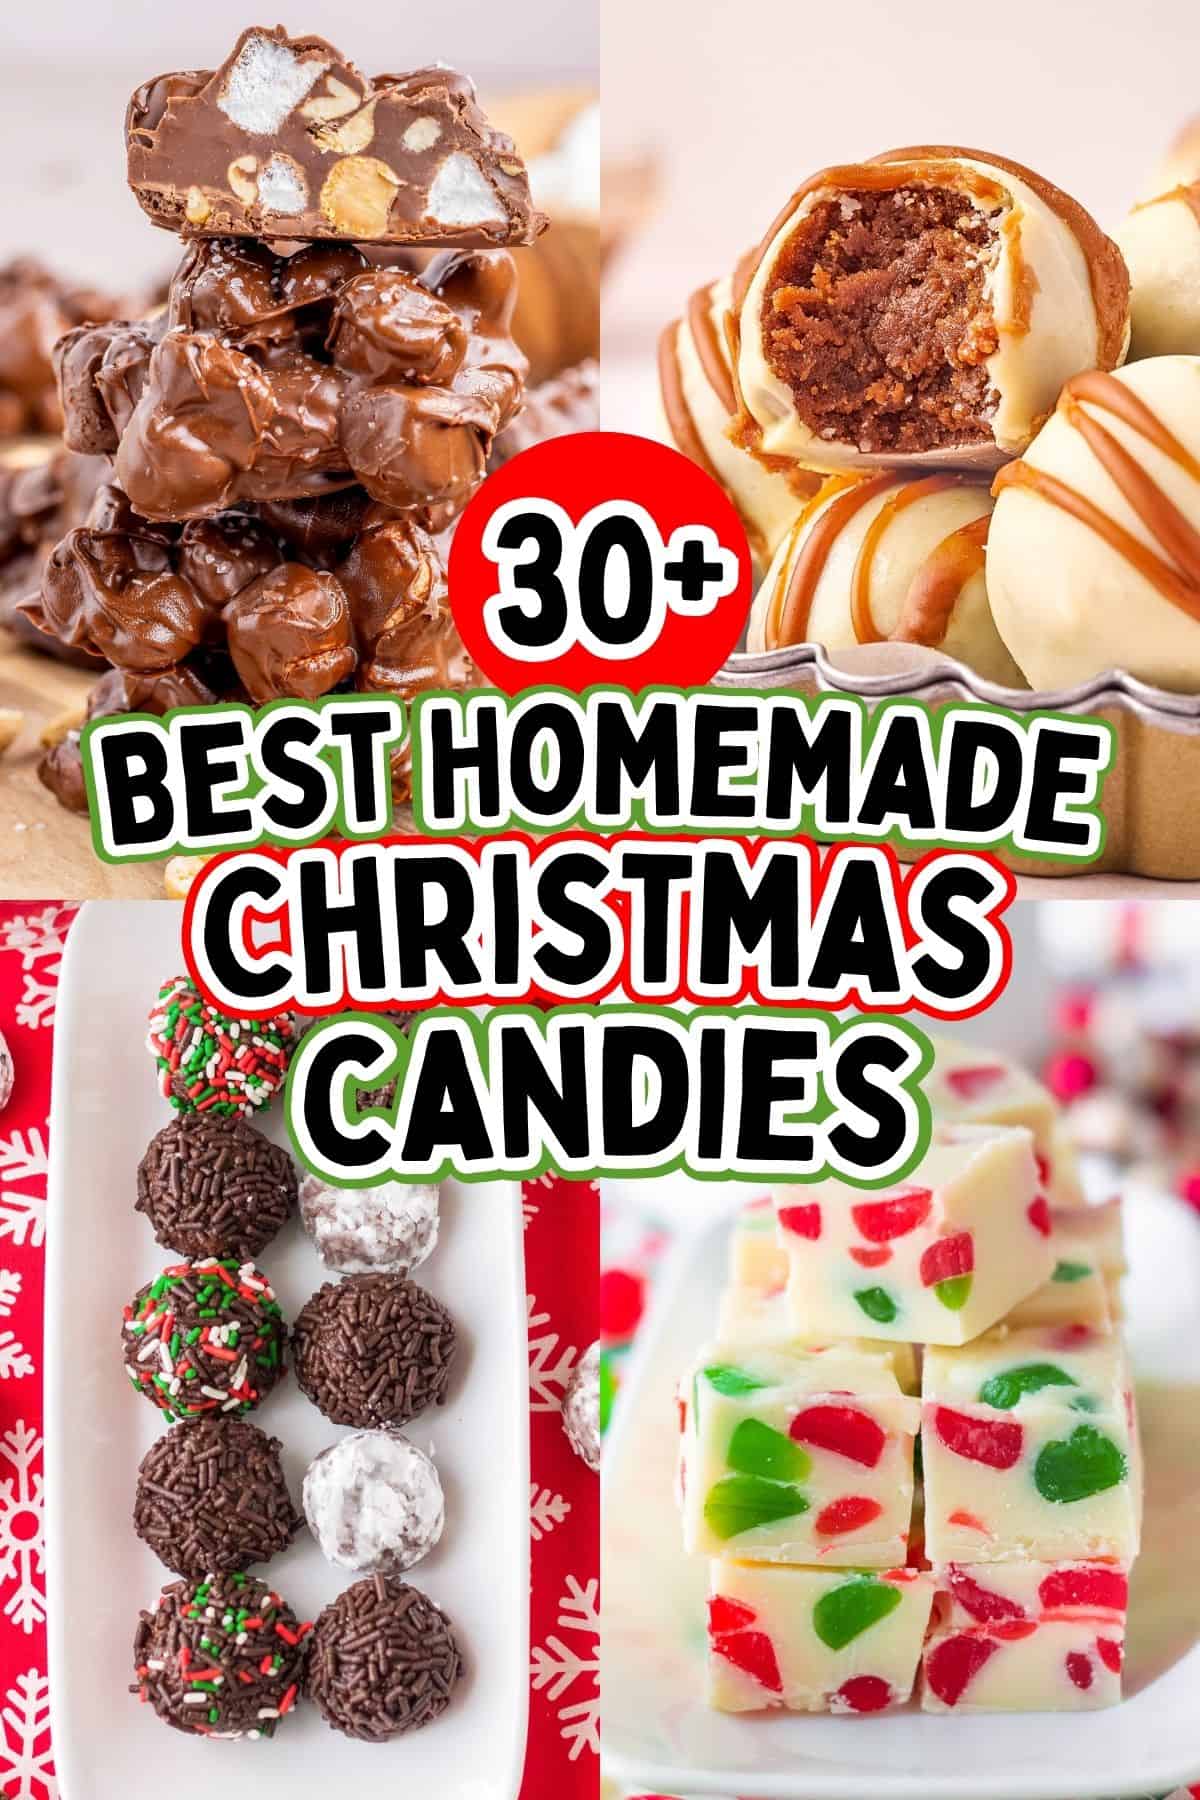 37 Gift-Worthy Christmas Candy Recipes For Everyone On Your List